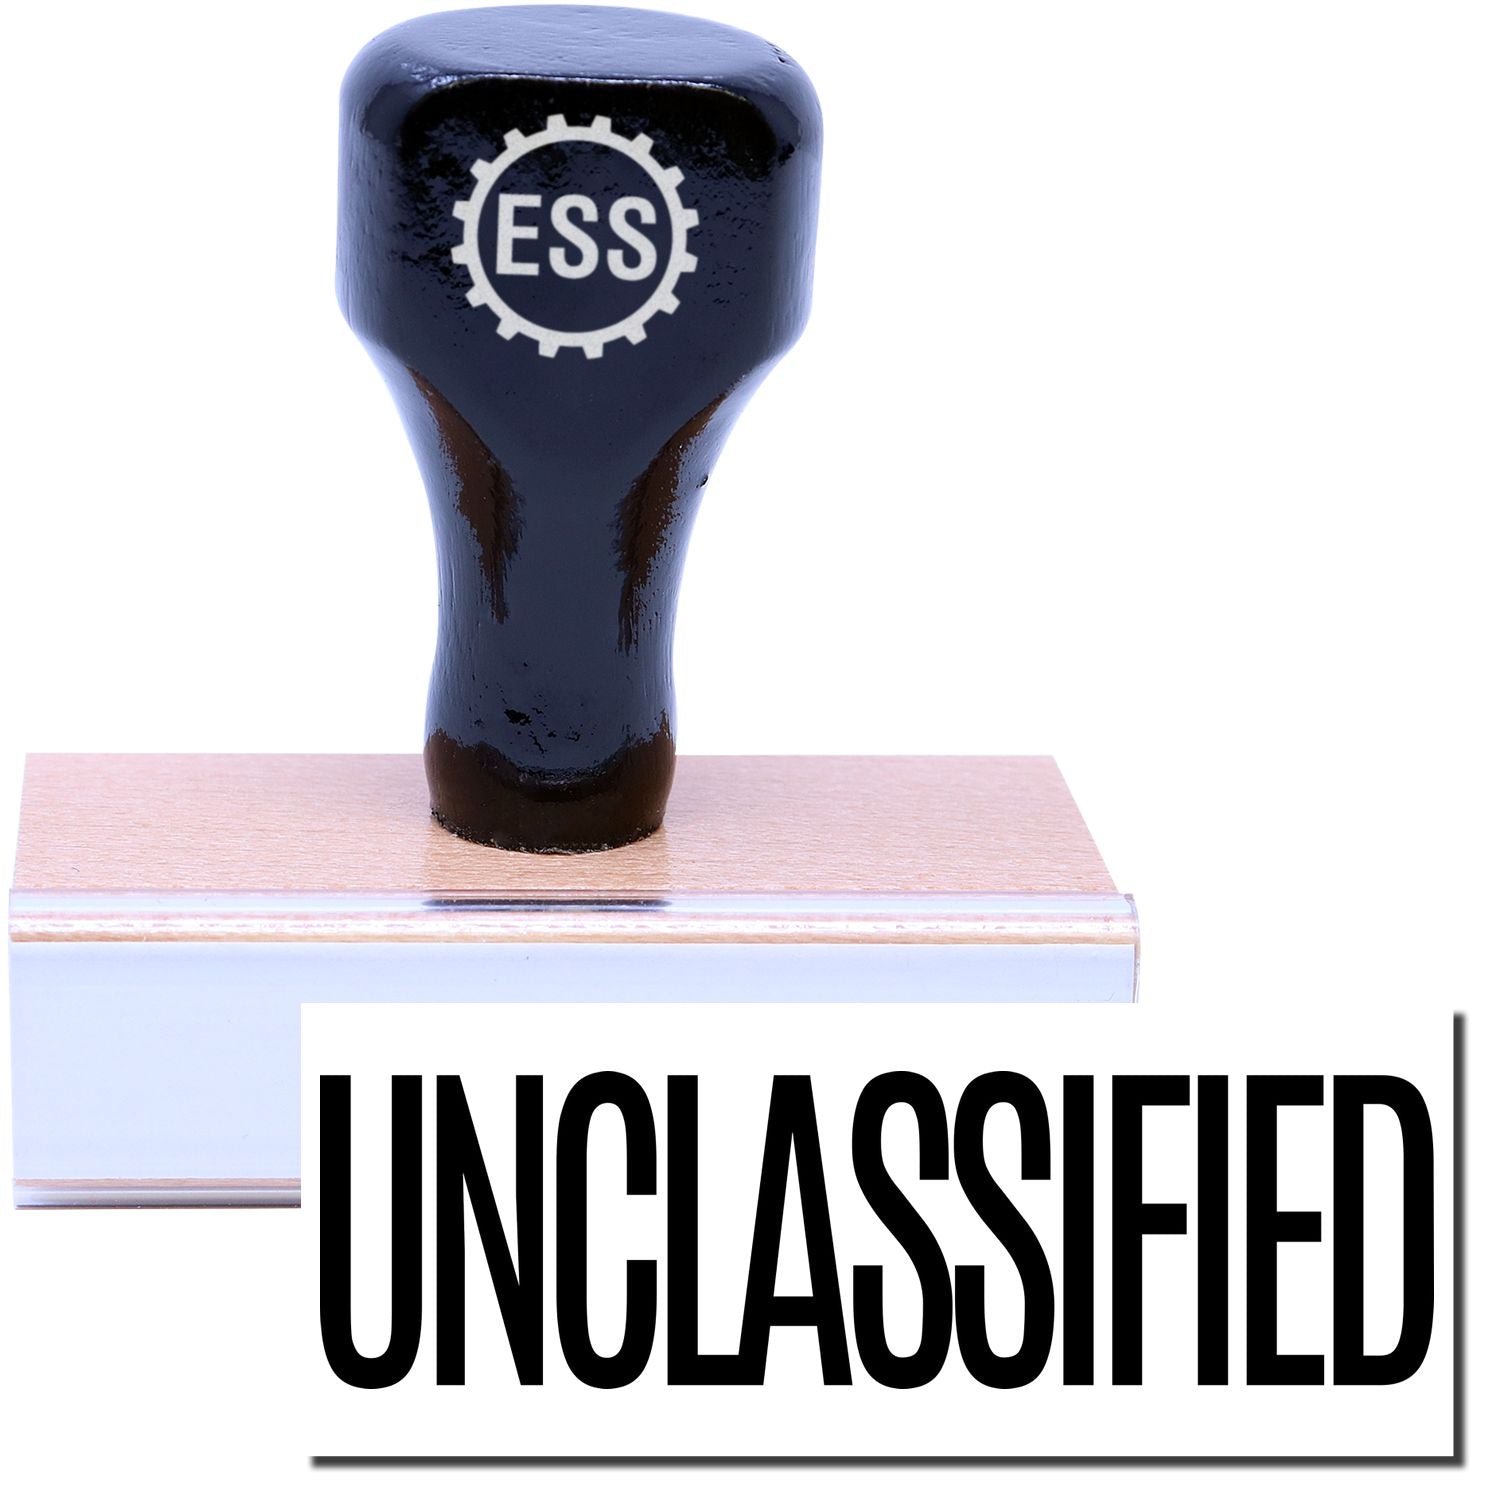 A stock office rubber stamp with a stamped image showing how the text "UNCLASSIFIED" is displayed after stamping.